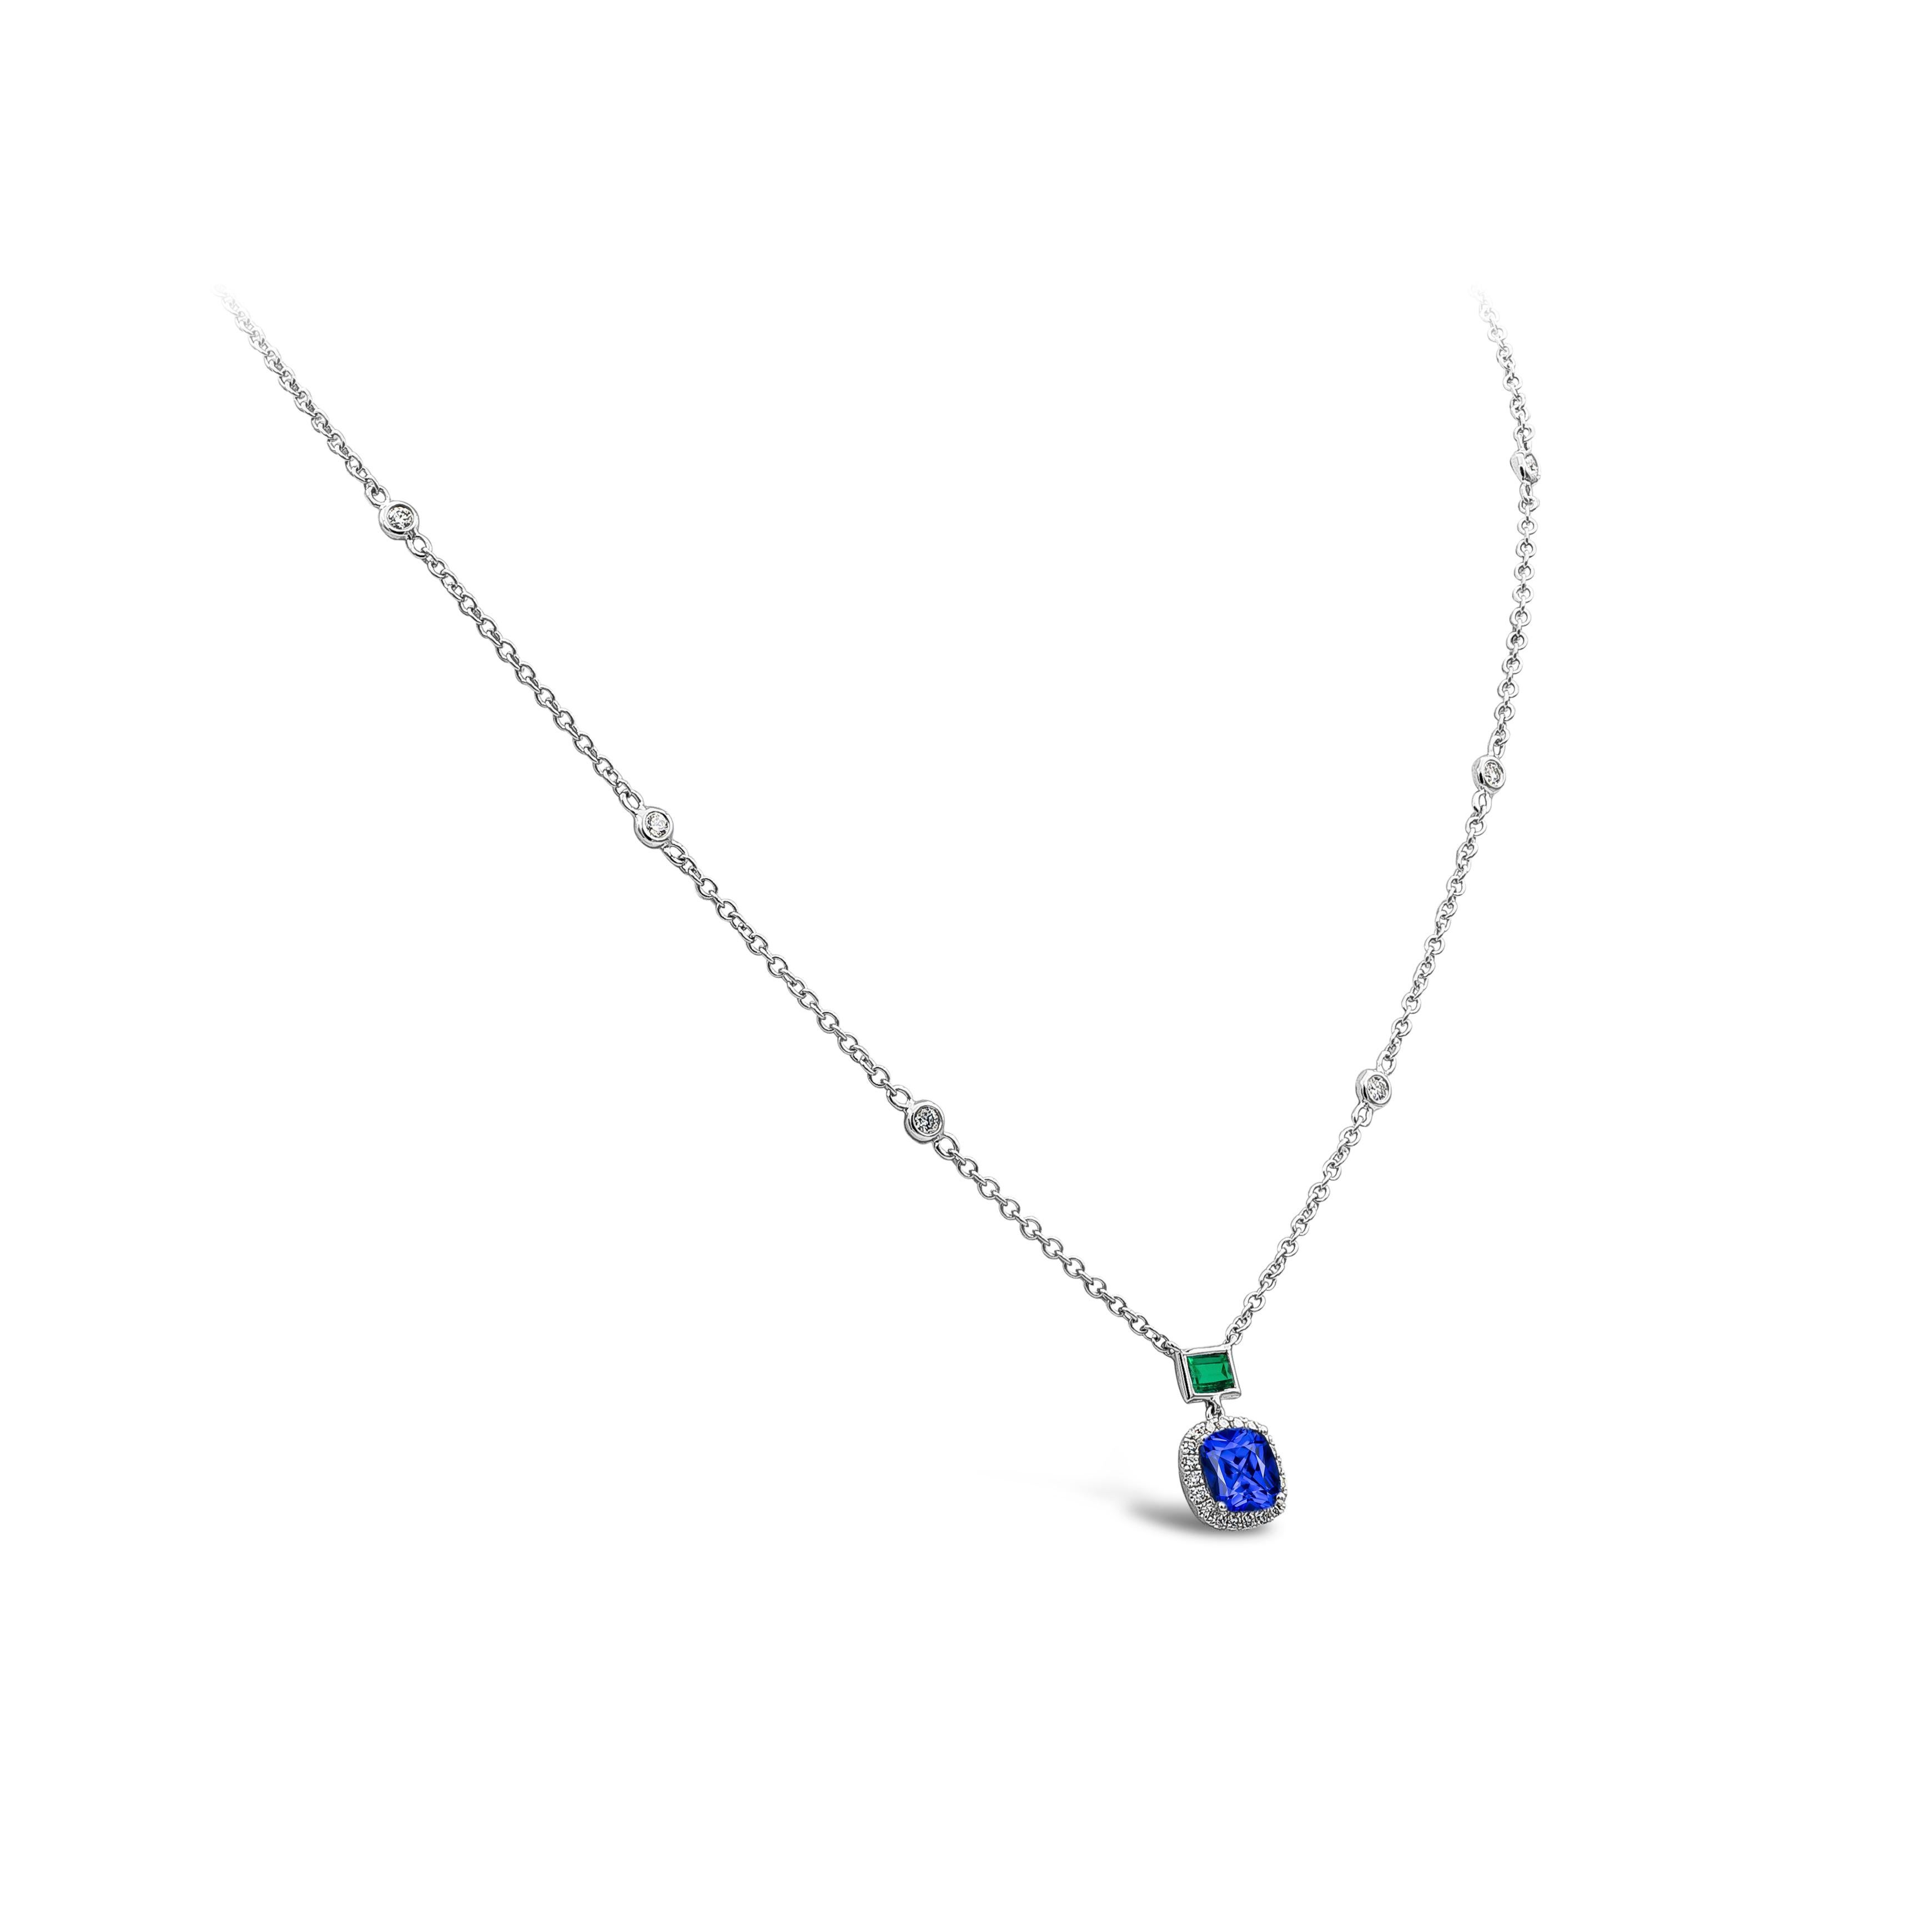 emerald and sapphire necklace